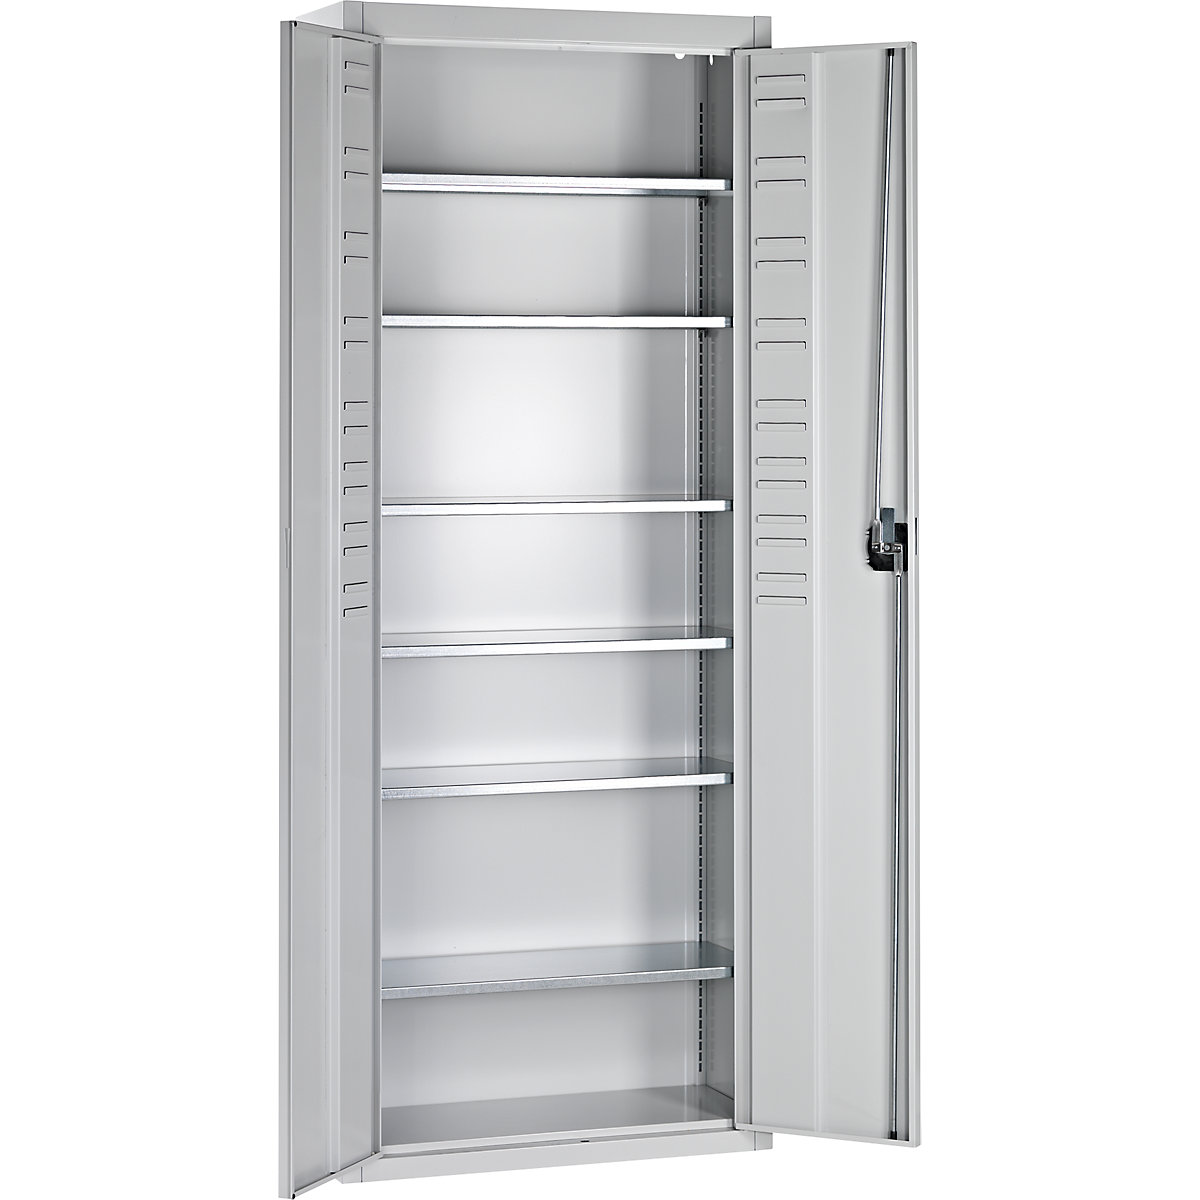 Storage cupboard, without open fronted storage bins – mauser, HxWxD 1740 x 680 x 280 mm, single colour, light grey, 3+ items-4